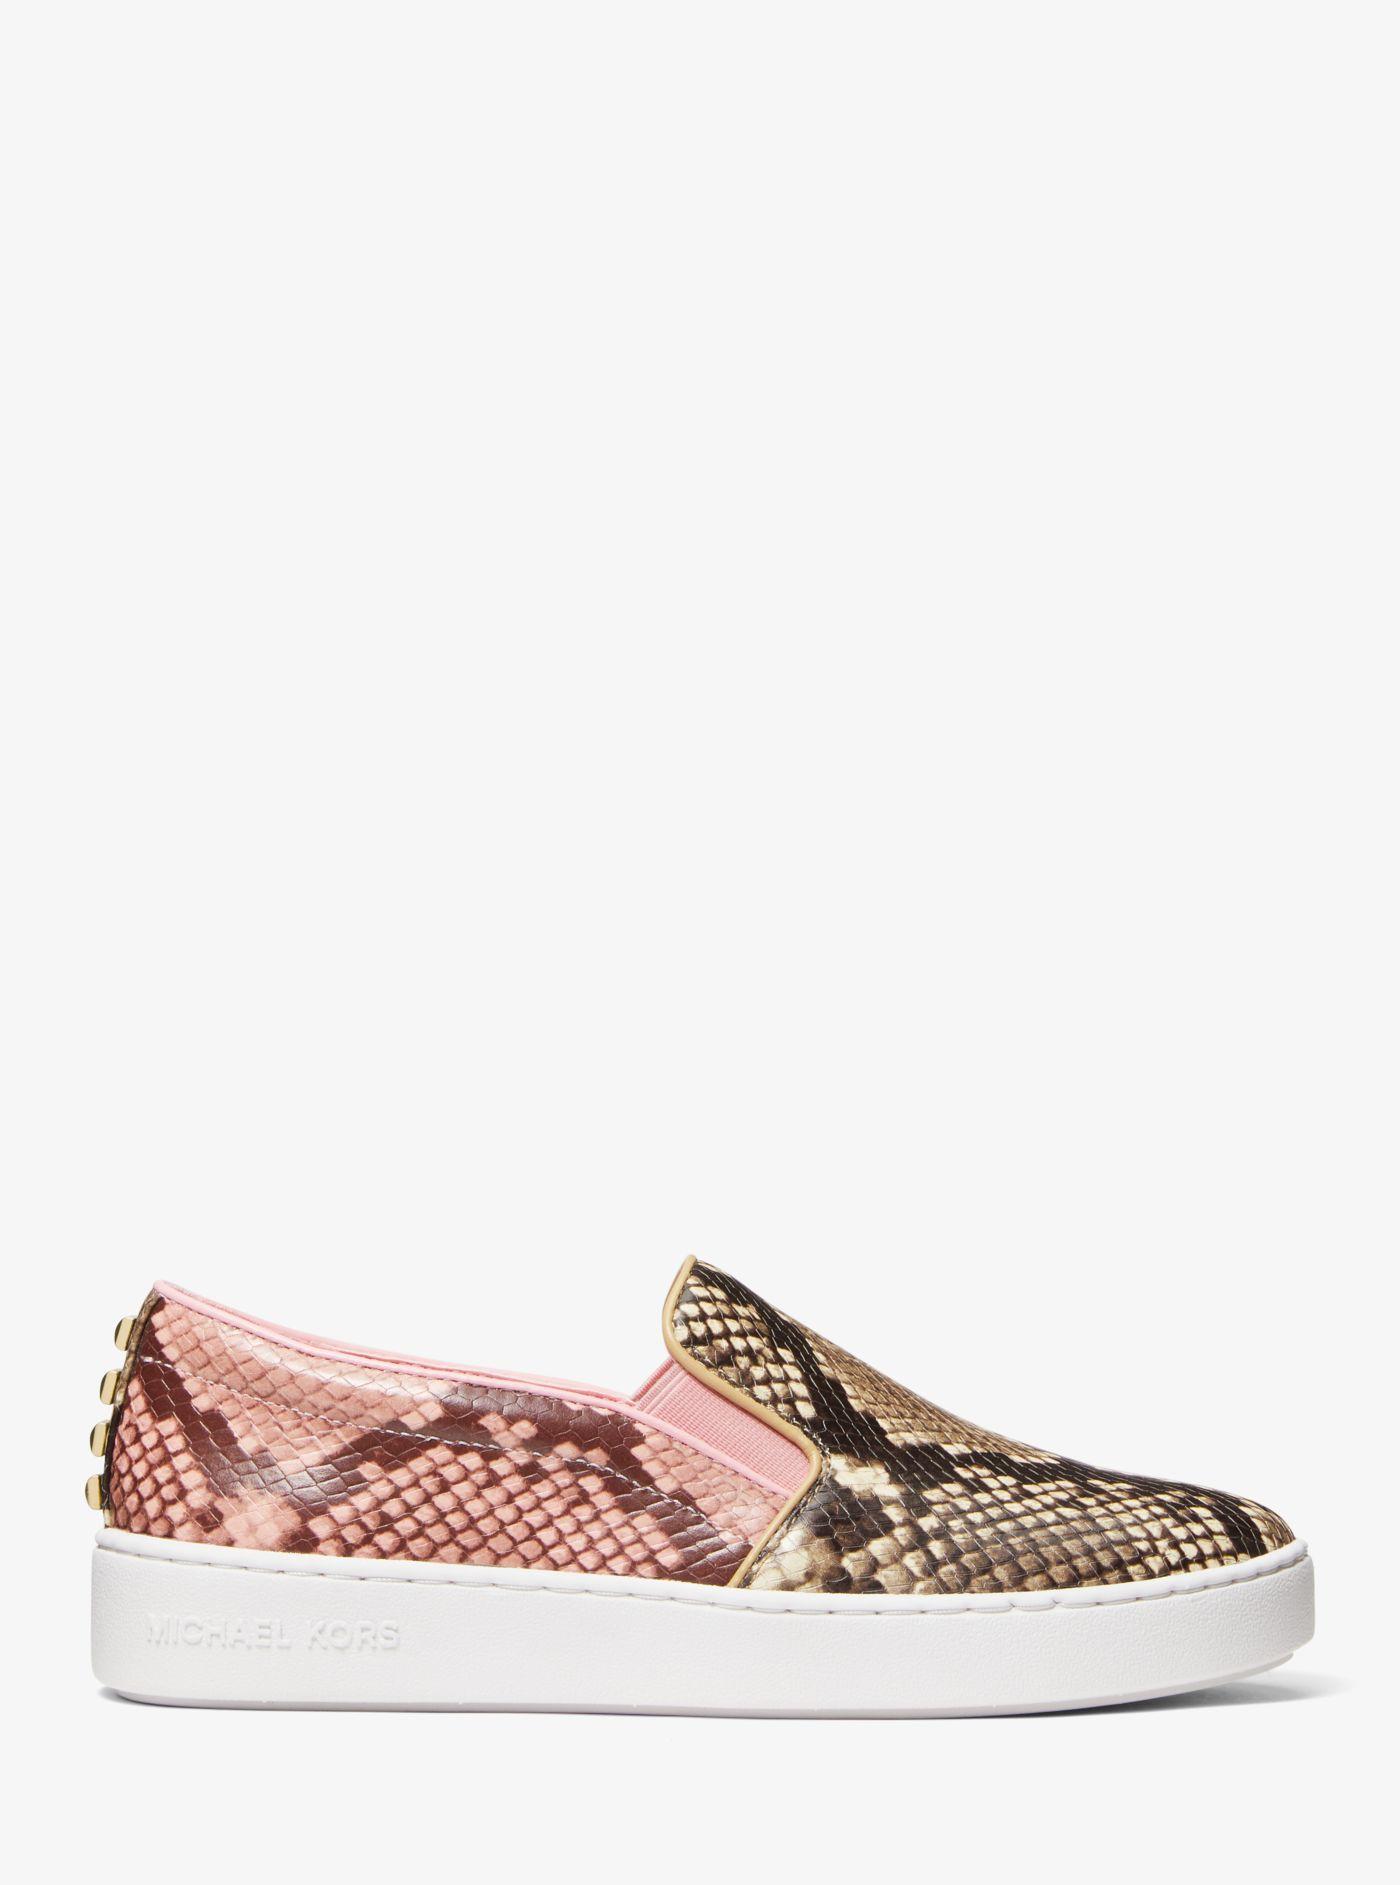 Michael Kors Keaton Studded Two-tone Python Embossed Leather Slip-on  Sneaker in Pink | Lyst Canada